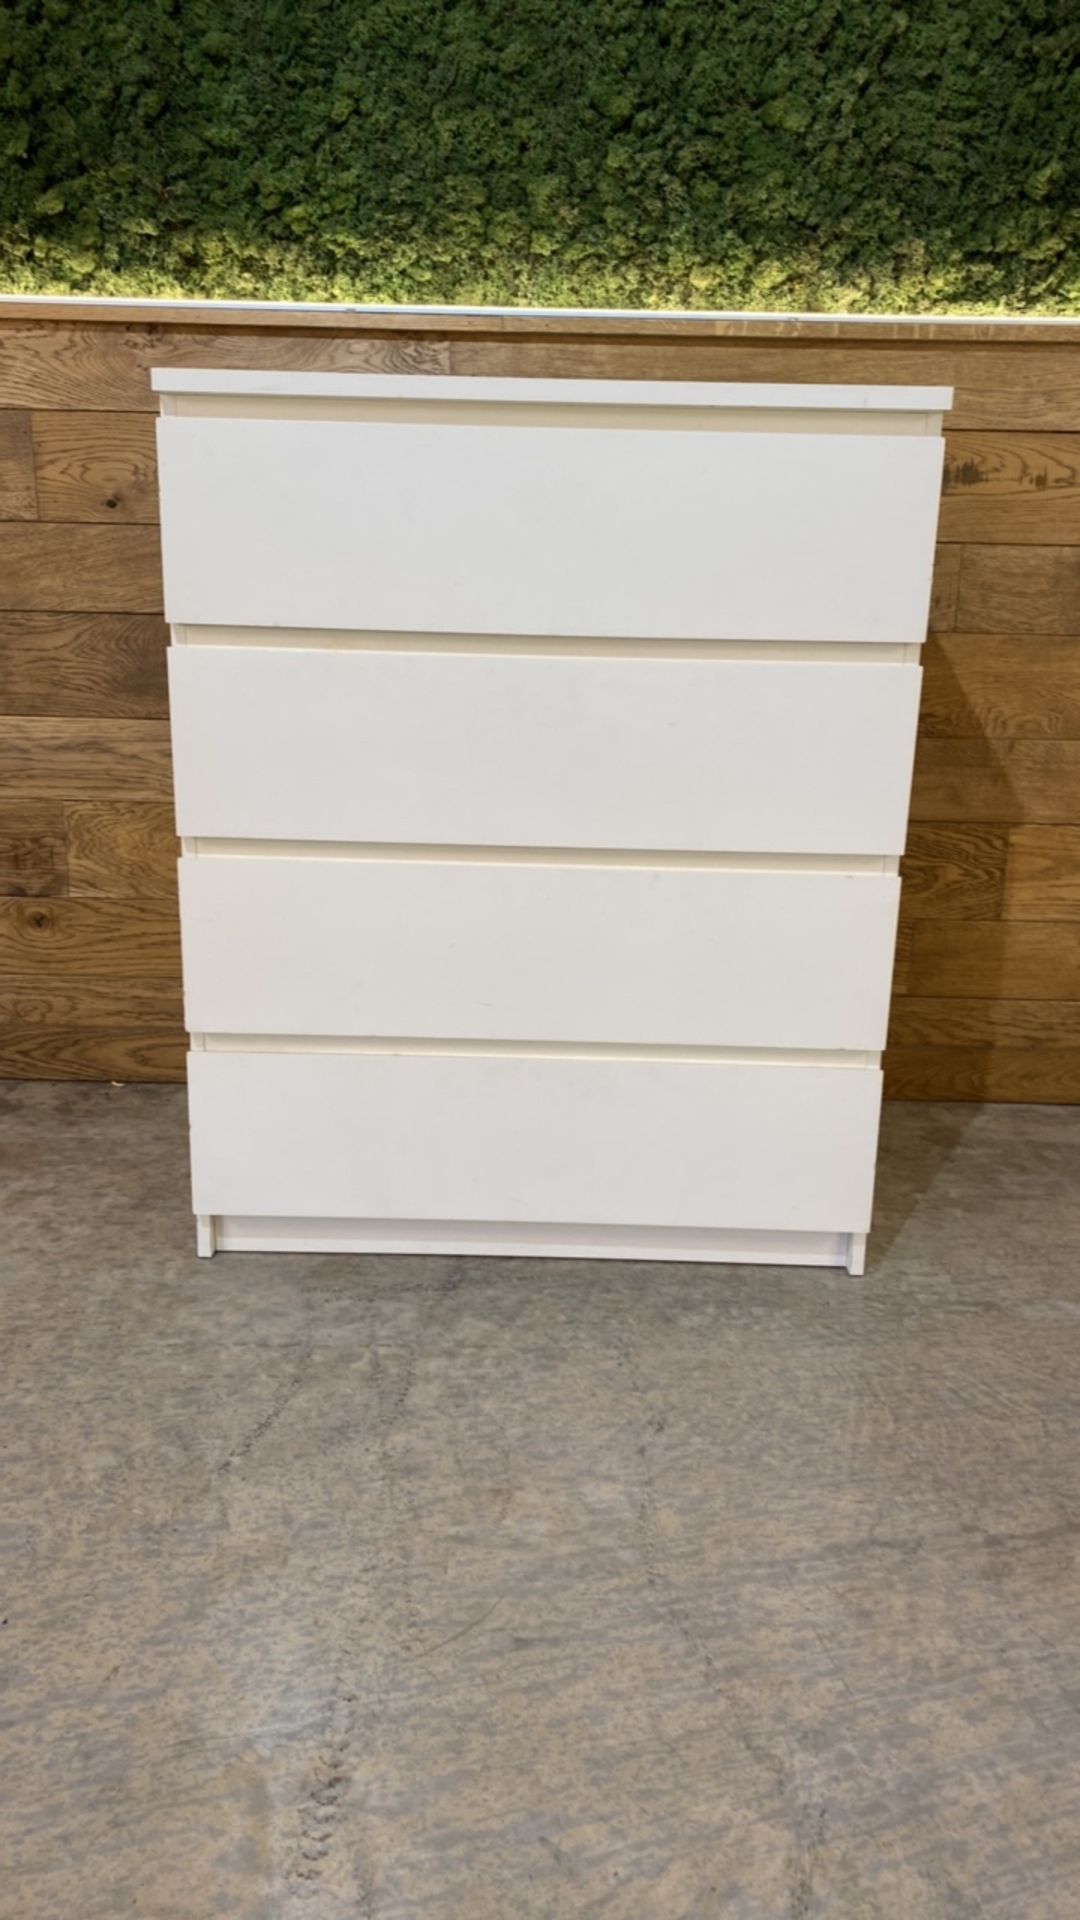 IKEA MALM White Wooden Chest Of Draws - Image 2 of 3